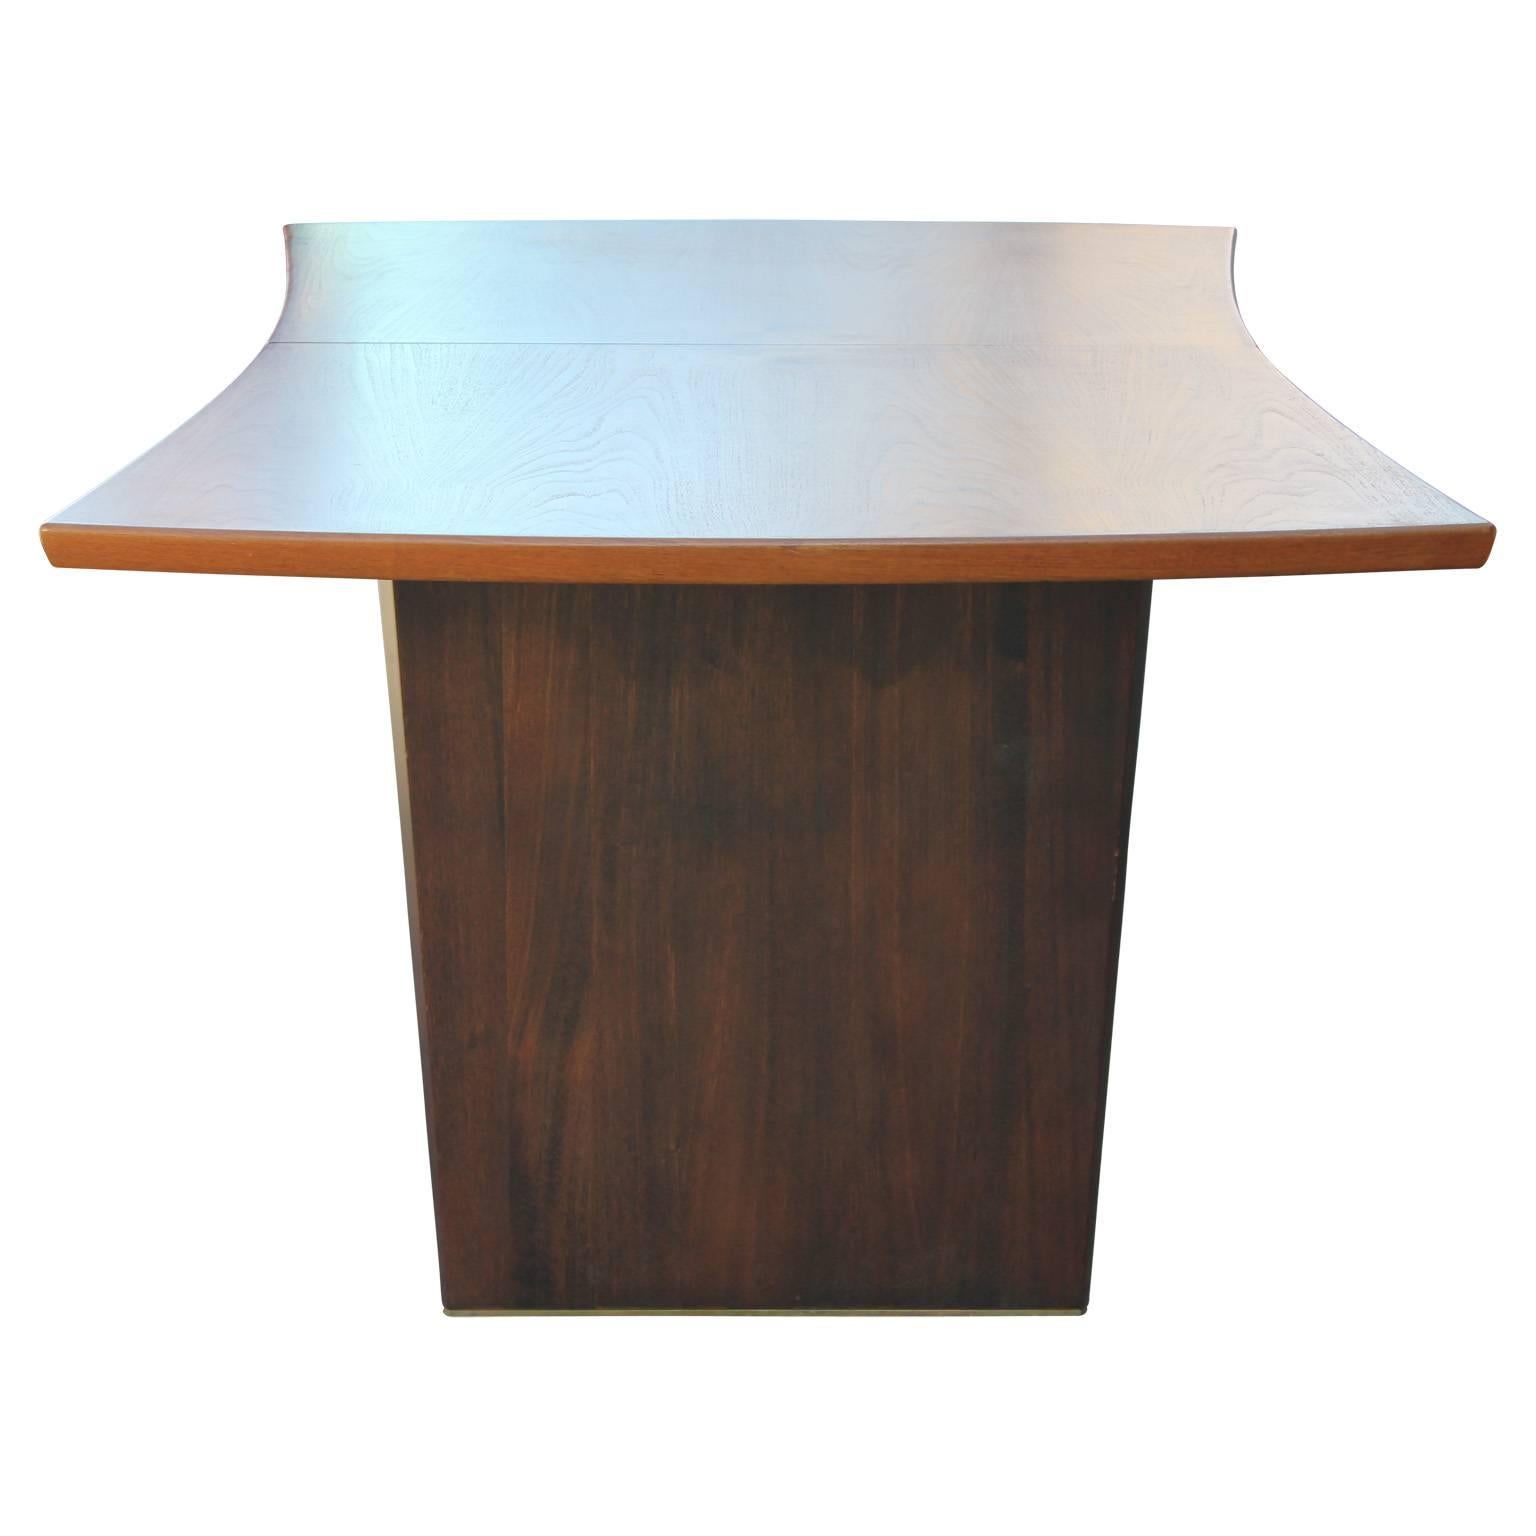 Gorgeous modern Harvey Probber rosewood and teak bow tie dining table. Includes two 18 inches leaves, making it perfect to expand for entertaining or downsize for daily use.  Well-built and sleek. 